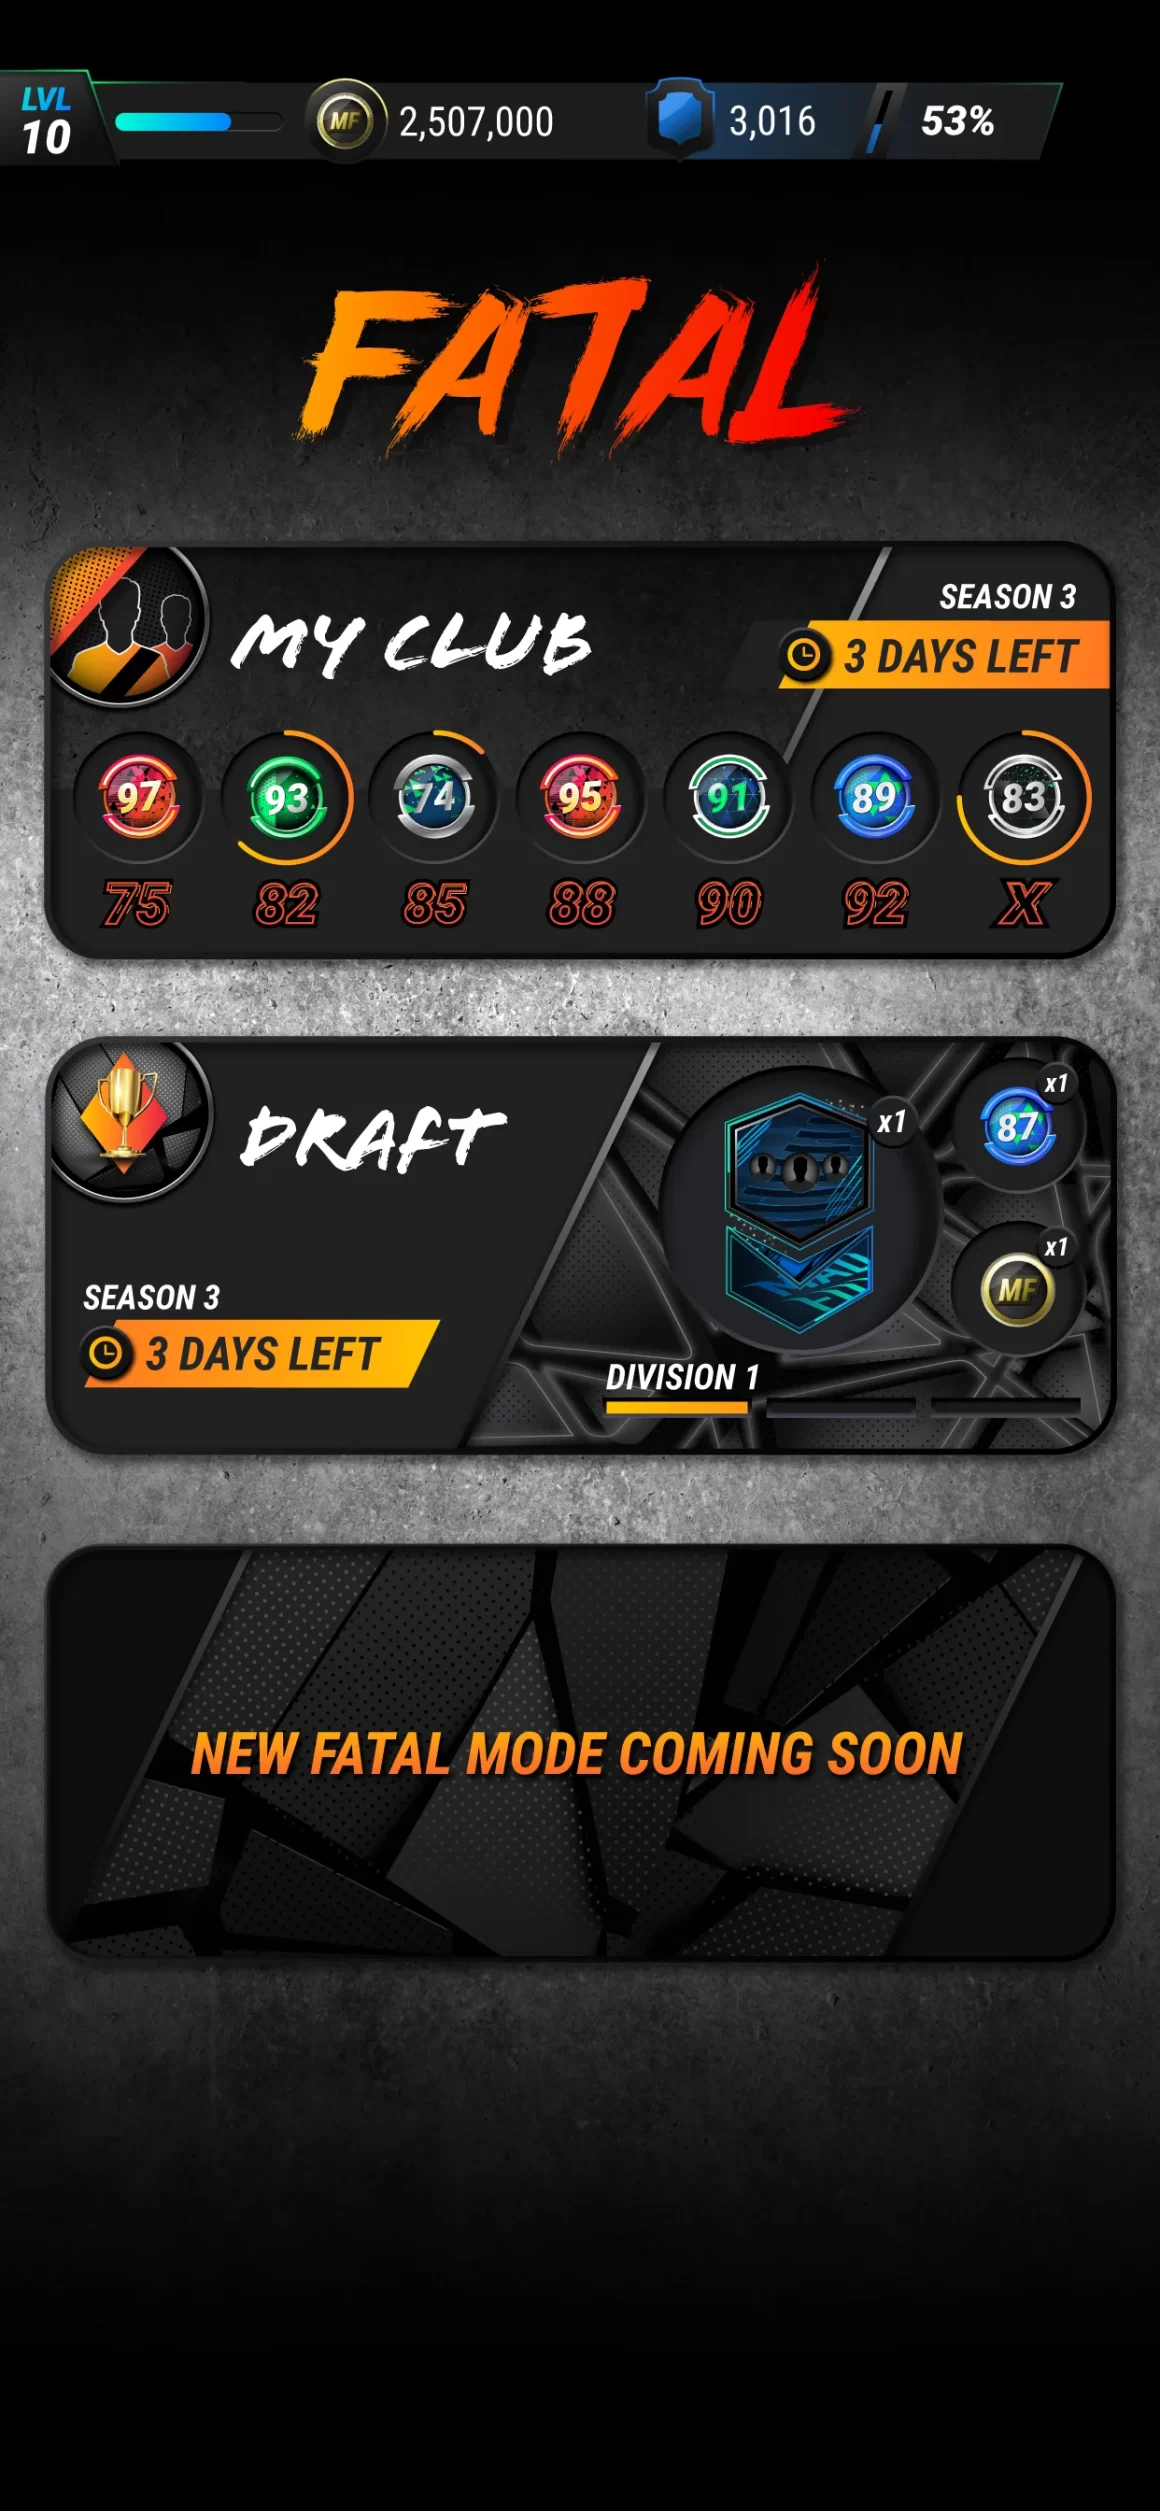 unnamed 6 8 1160x2511 - Madfut 24 Mod Apk v1.1.5 (Unlimited Packs) All Cards Unlocked